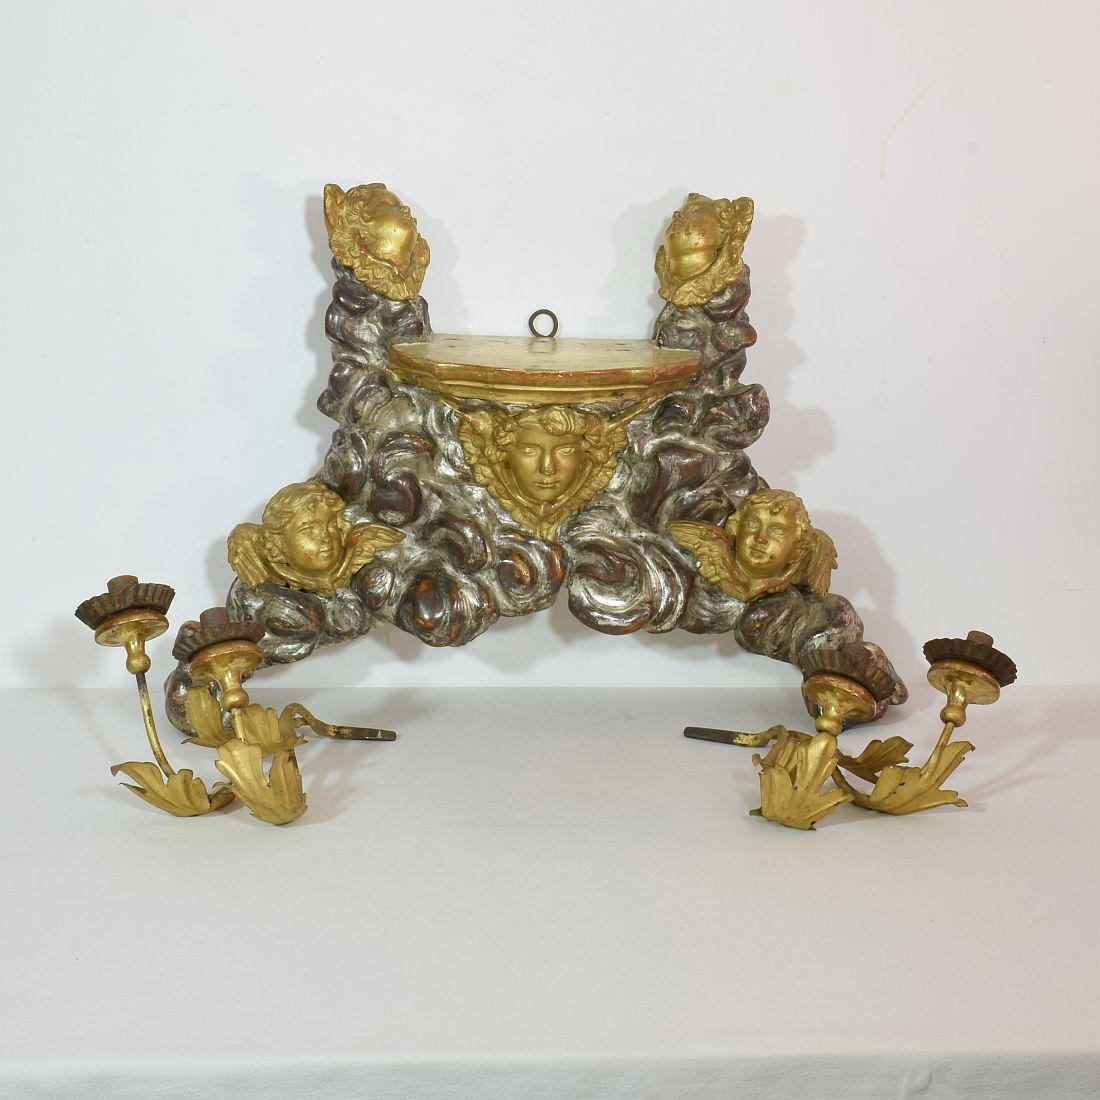 19th Century Italian Giltwood Baroque Style Altar with Candleholders and Angels 16